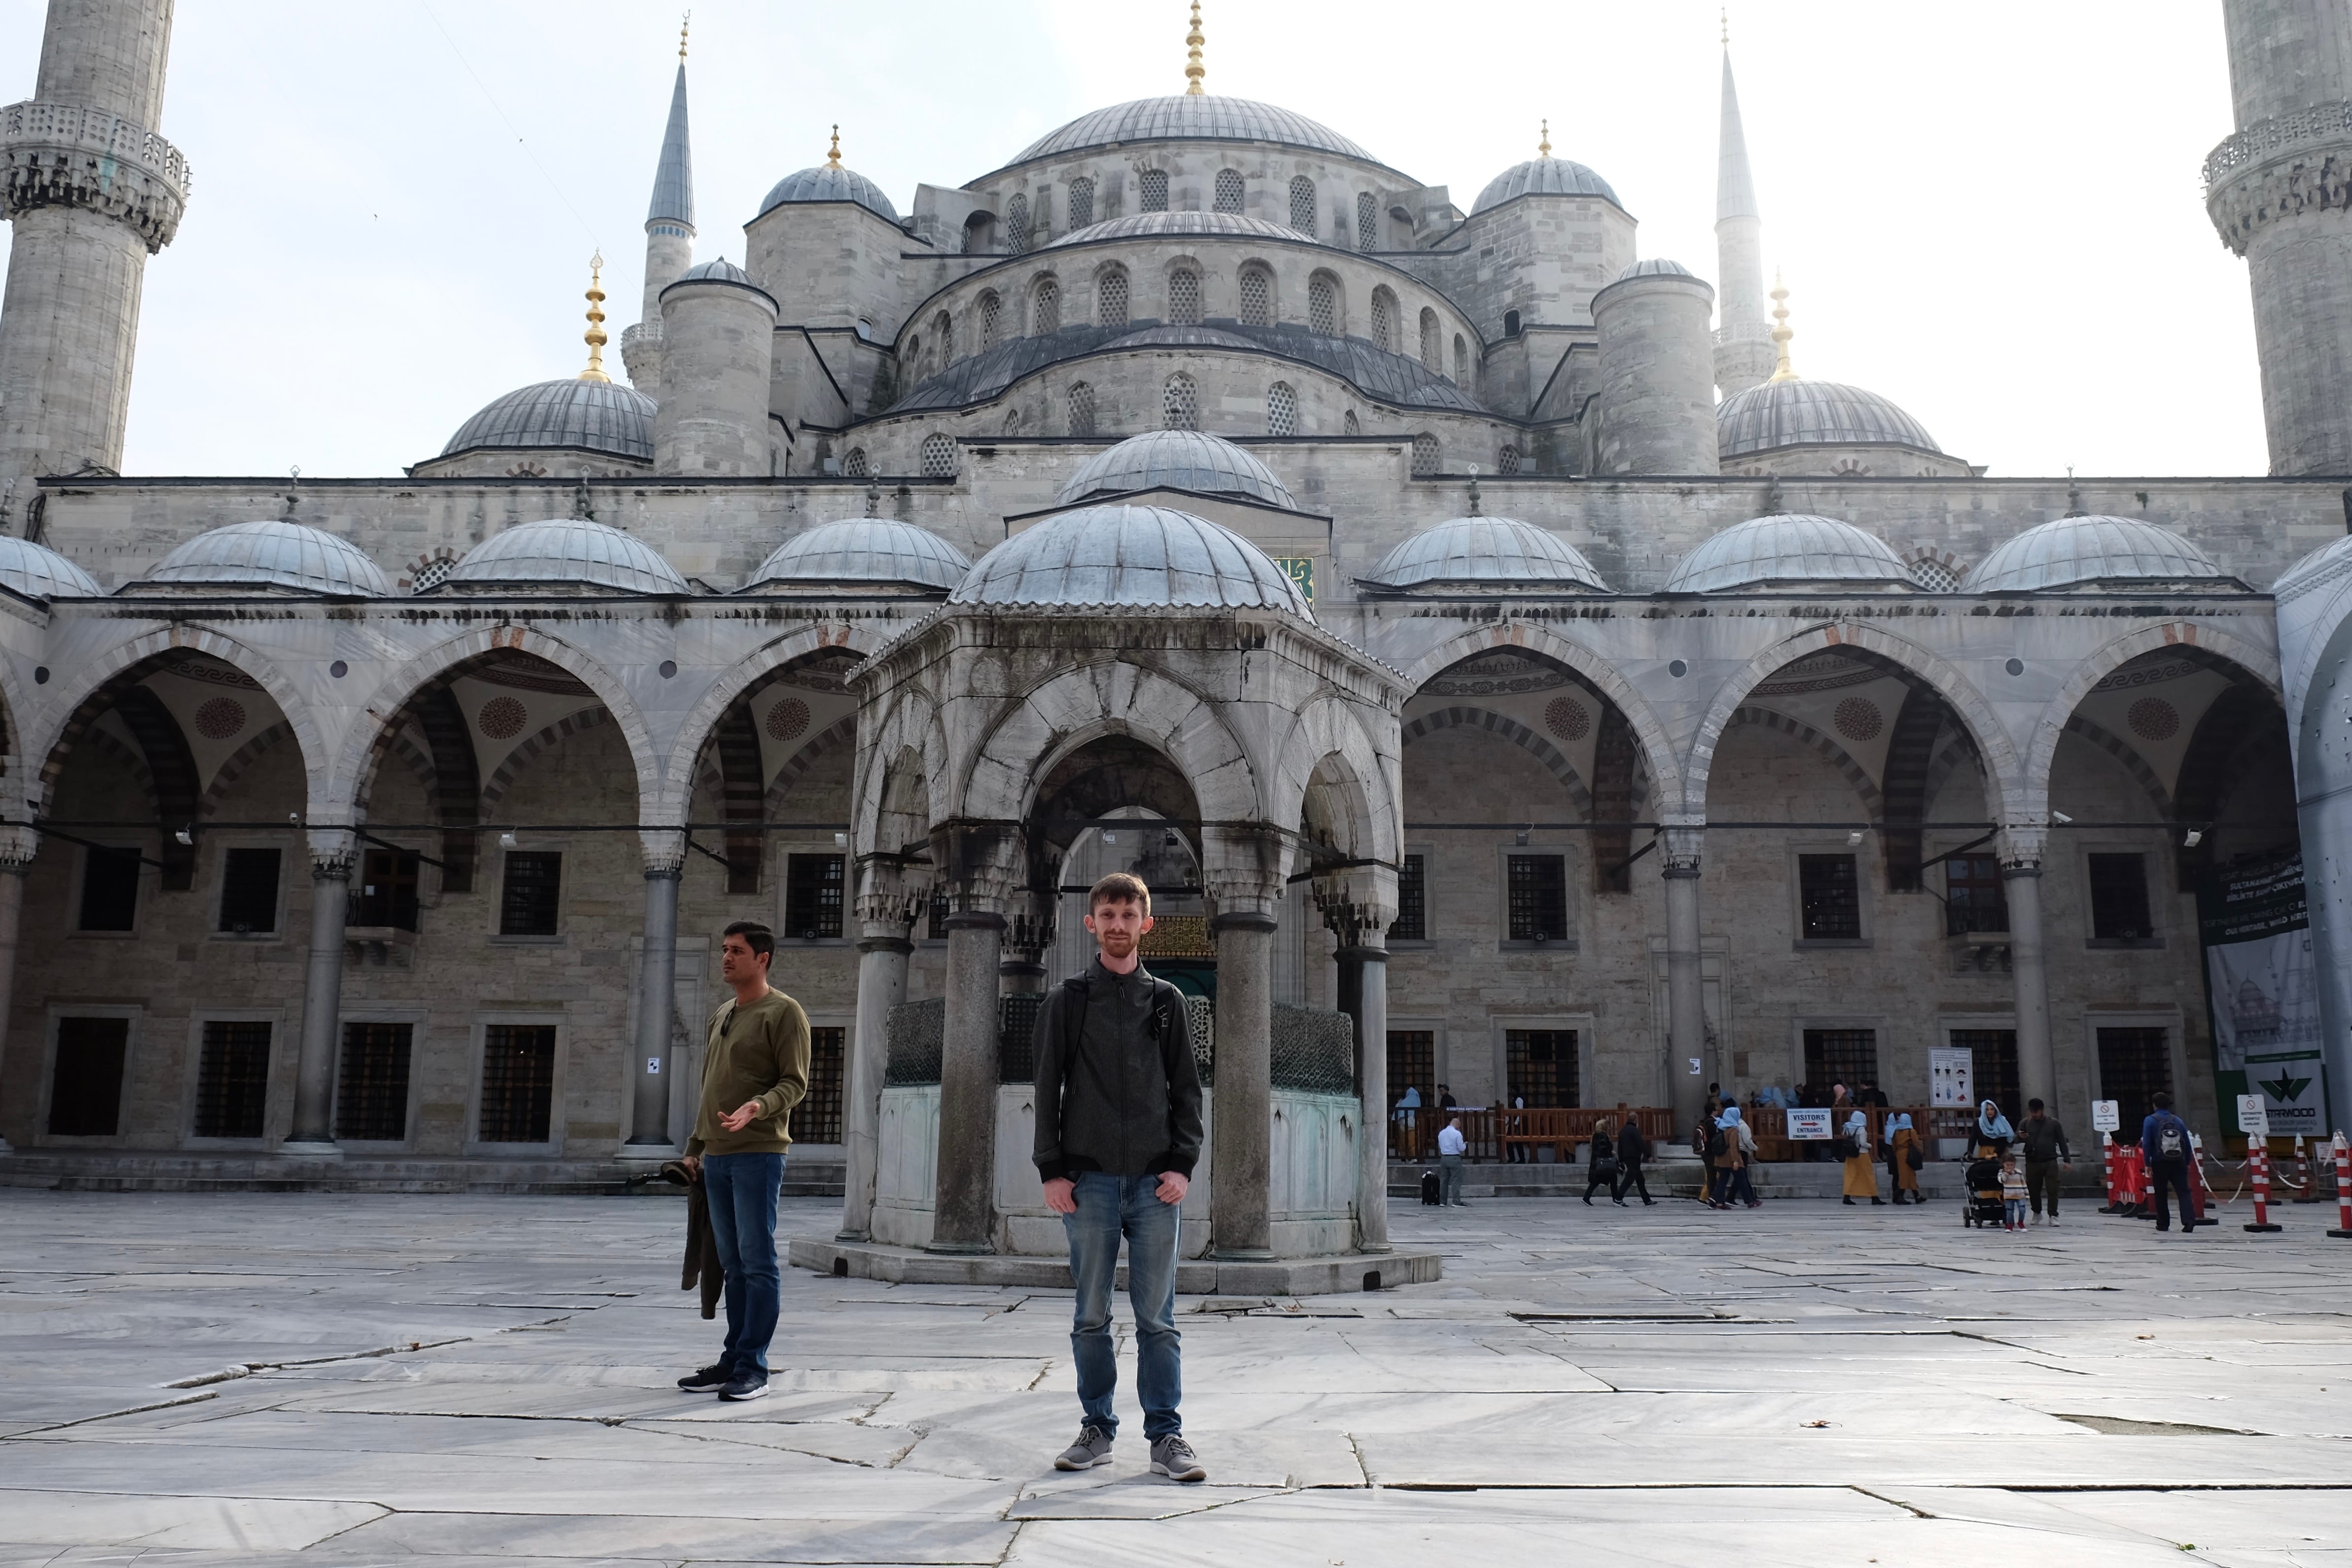 Me in the courtyard of the Blue Mosque